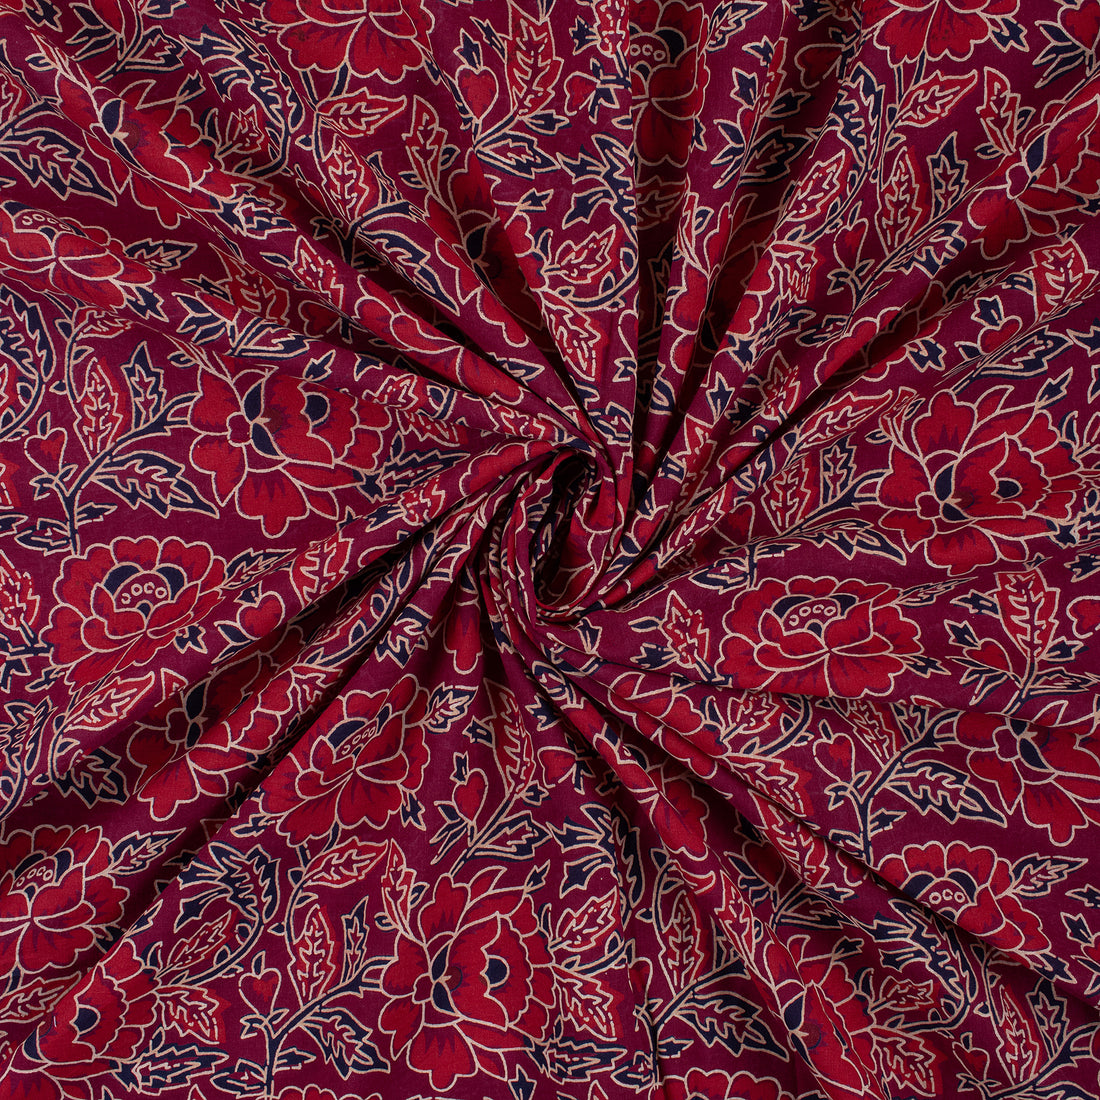 Running Fabric: Maroon Ajrakh Floral Block Printed Cotton Online